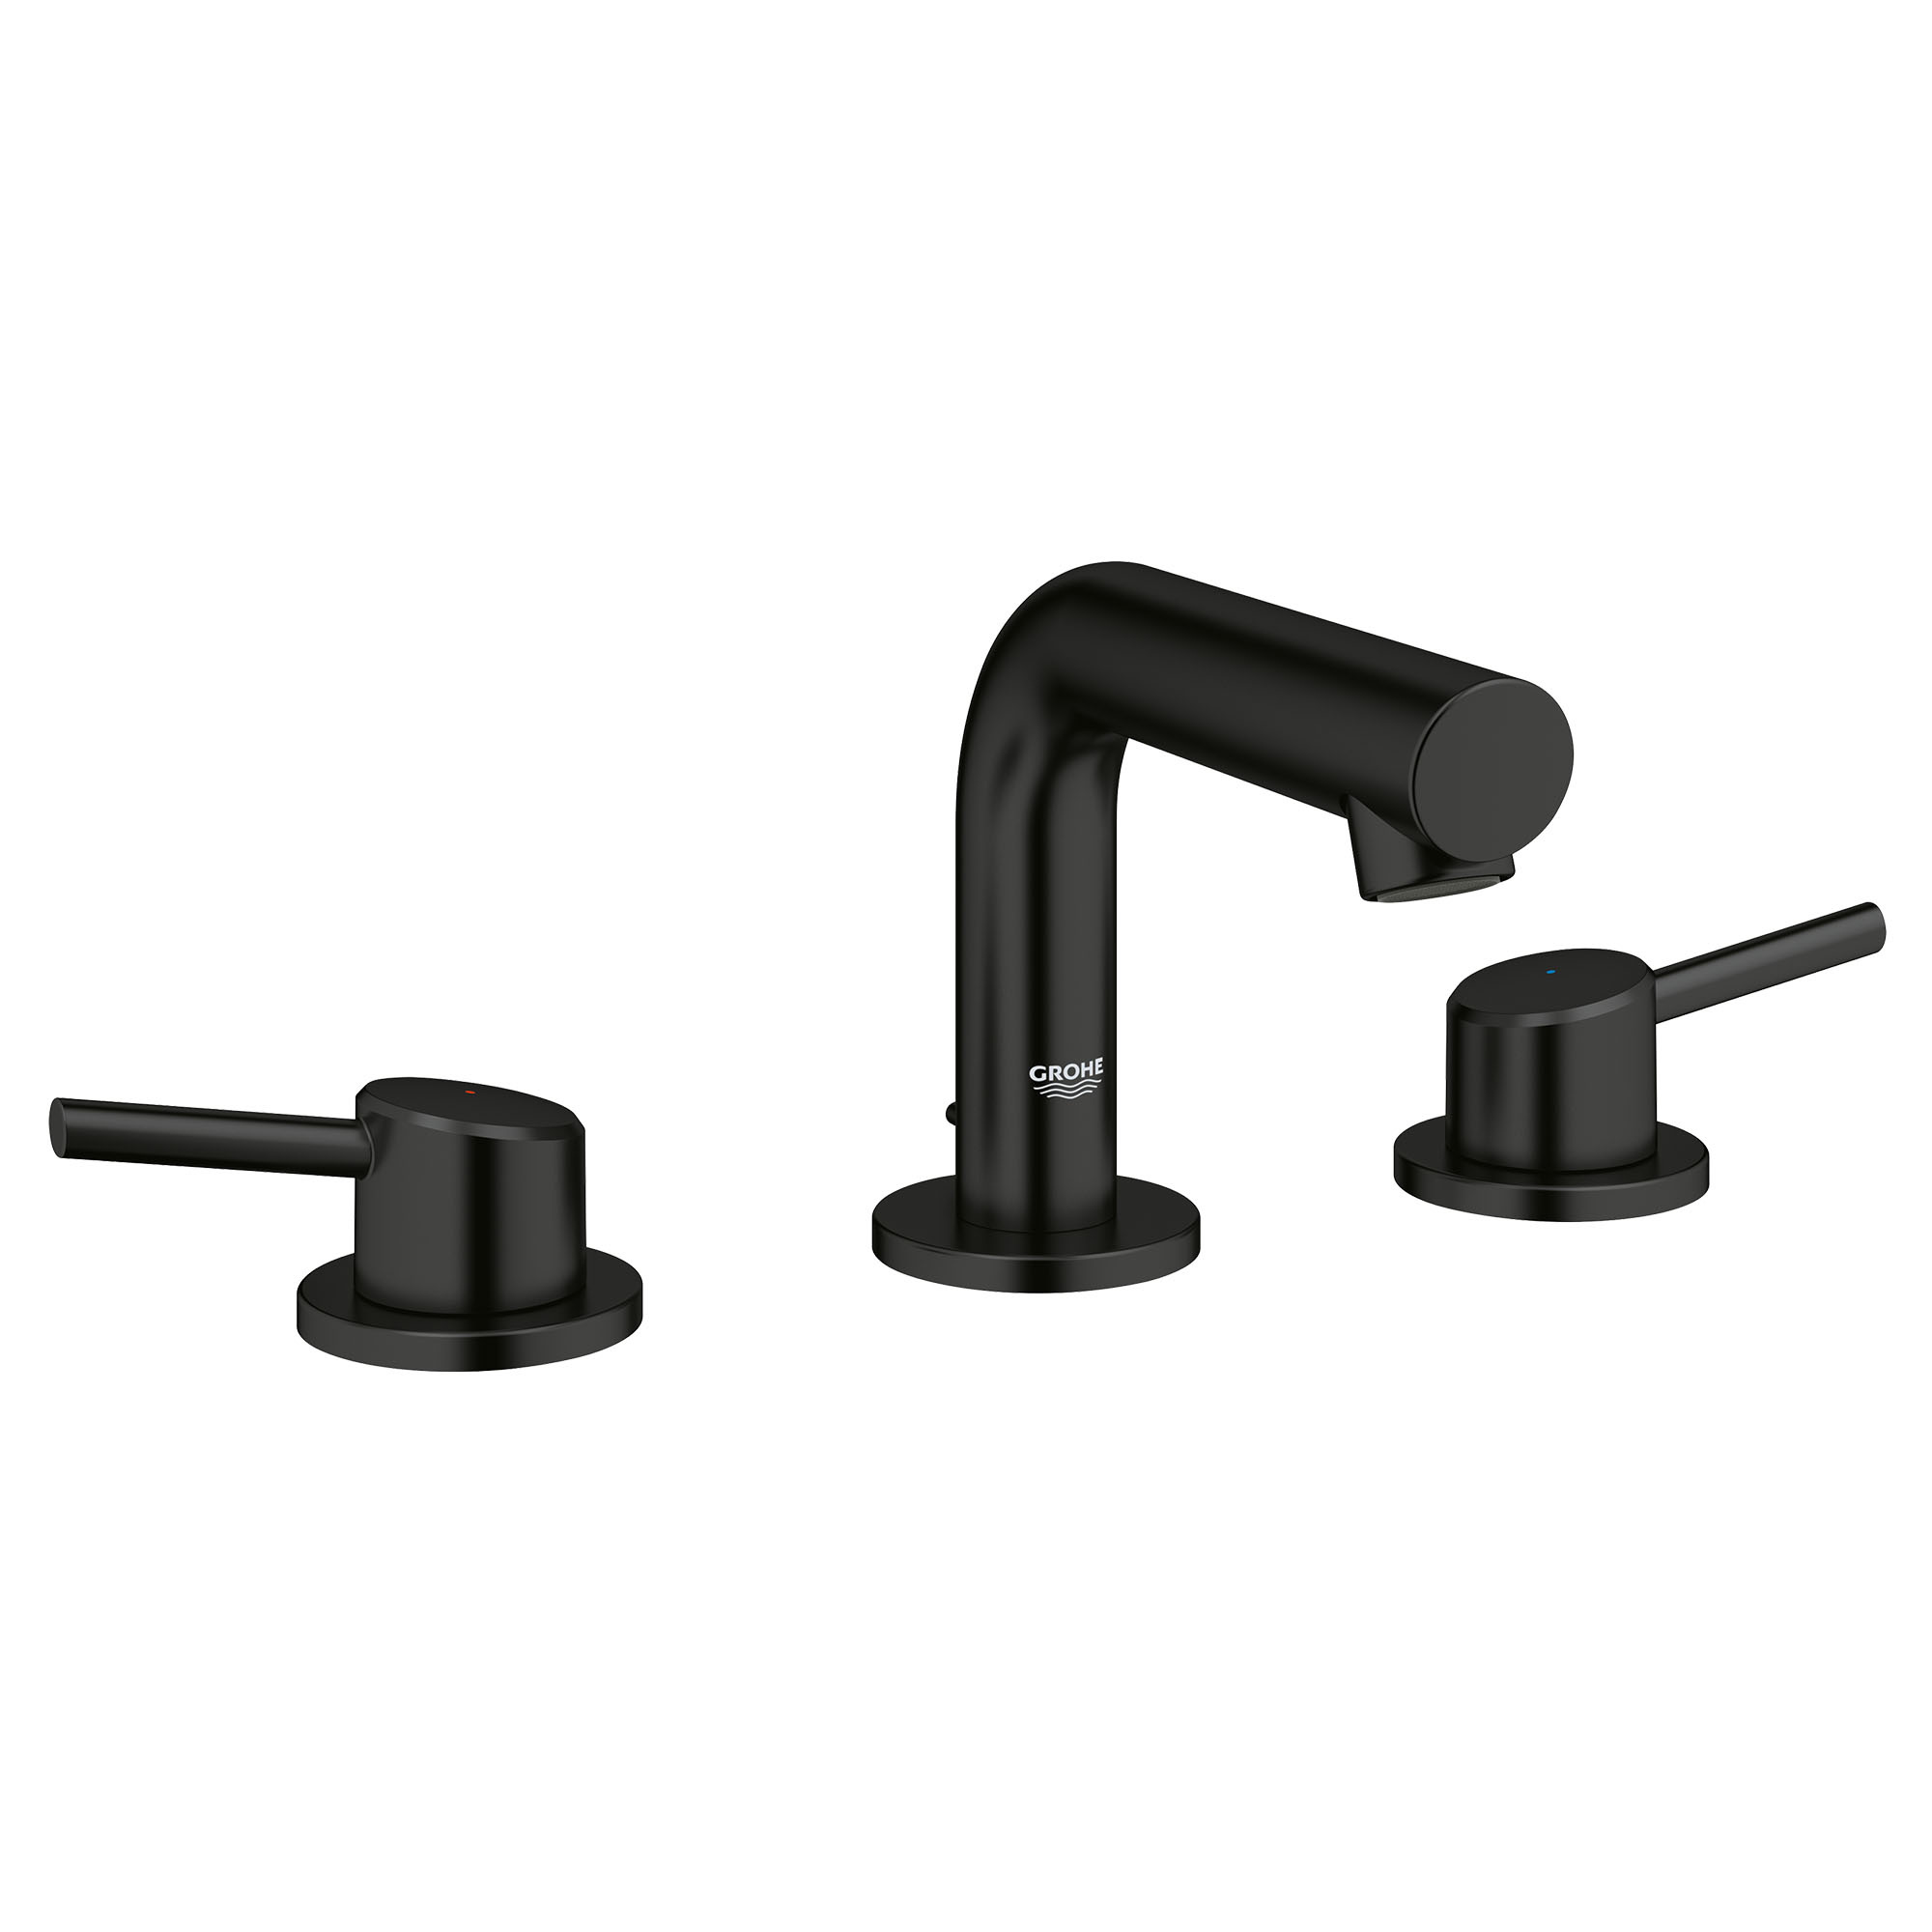 Grohe Concetto 8 Widespread 2 Handles